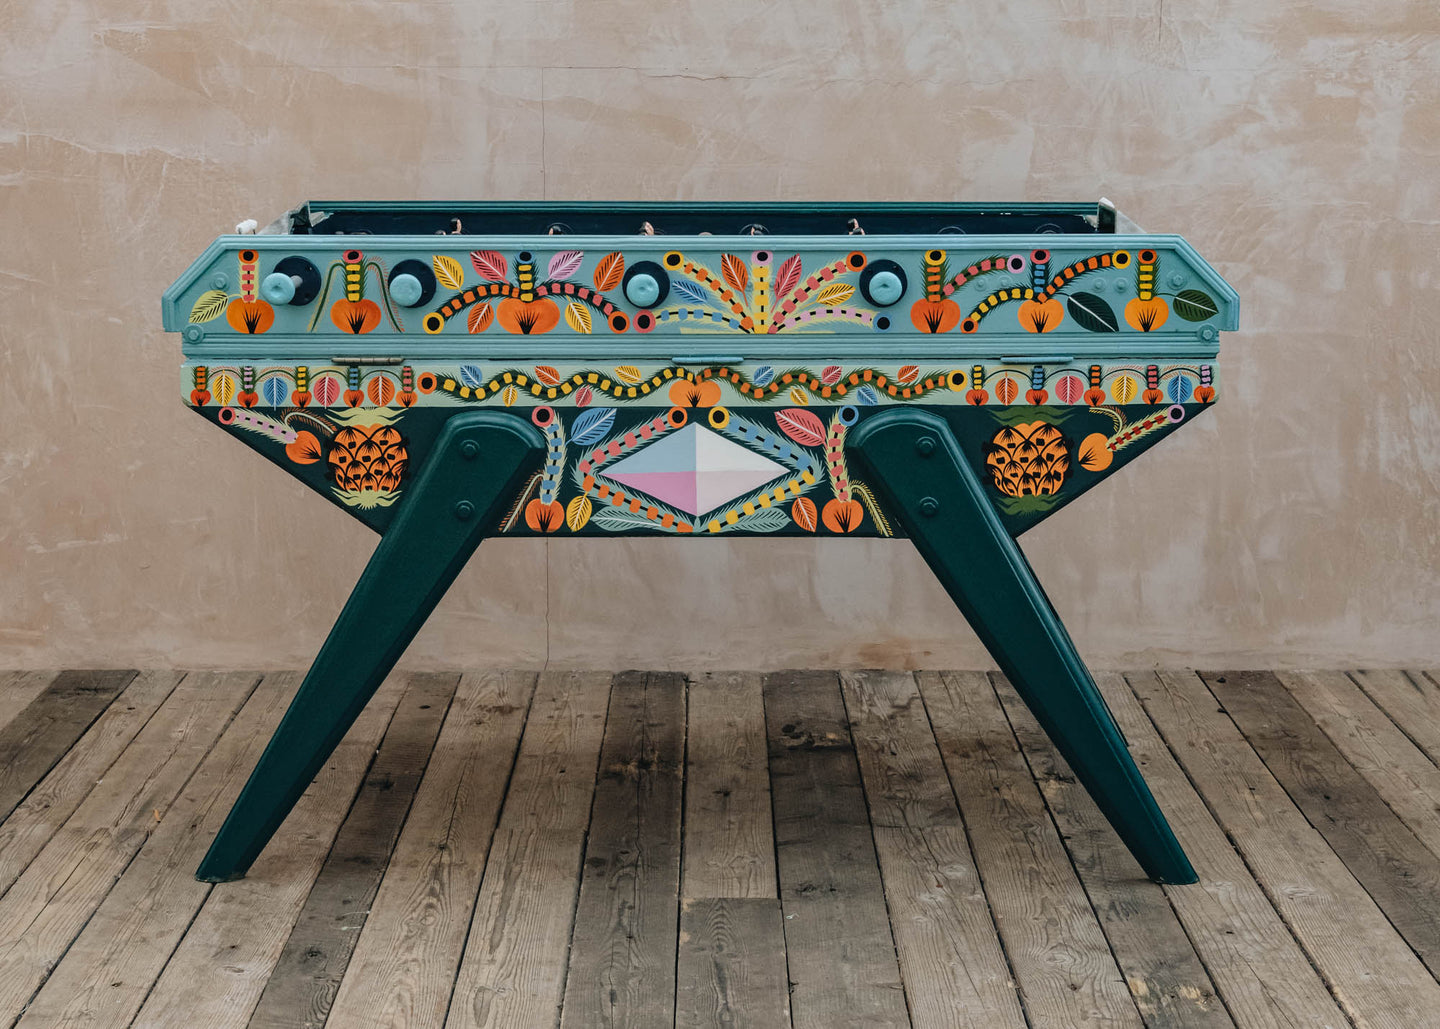 Vintage Football Table in Teal and Green